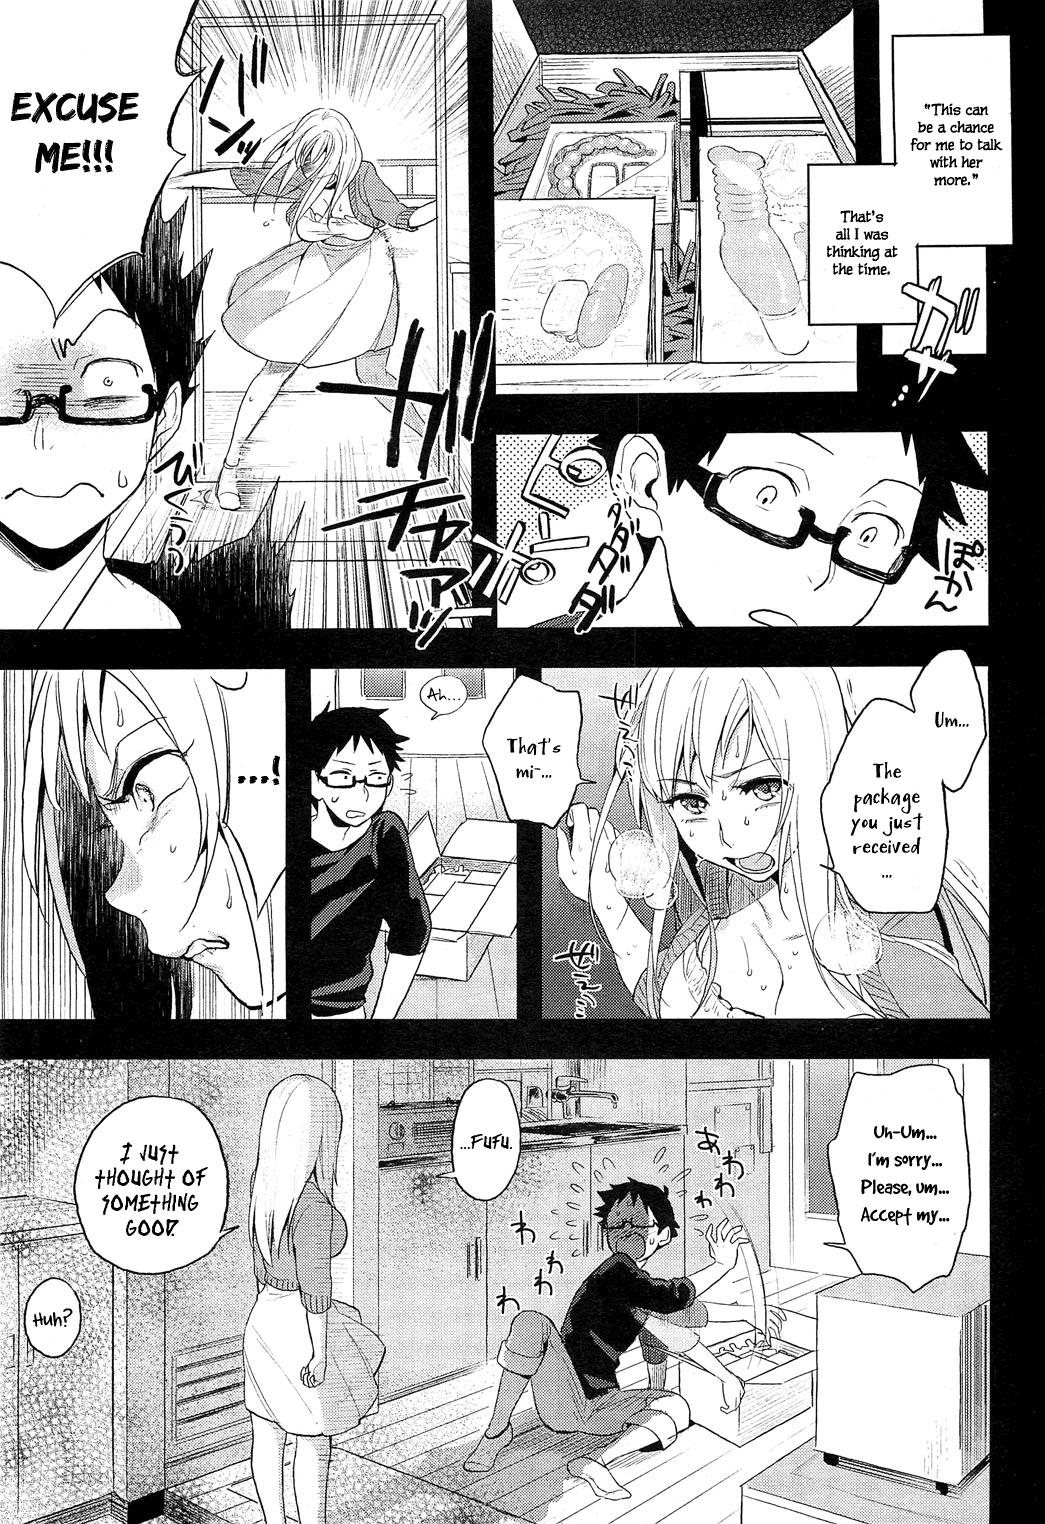  [Igumox] Omocha-kun to Onee-san | A Young Lady And Her Little Toy (COMIC HOTMiLK 2012-12) [English] =LWB= Vibrator - Page 5